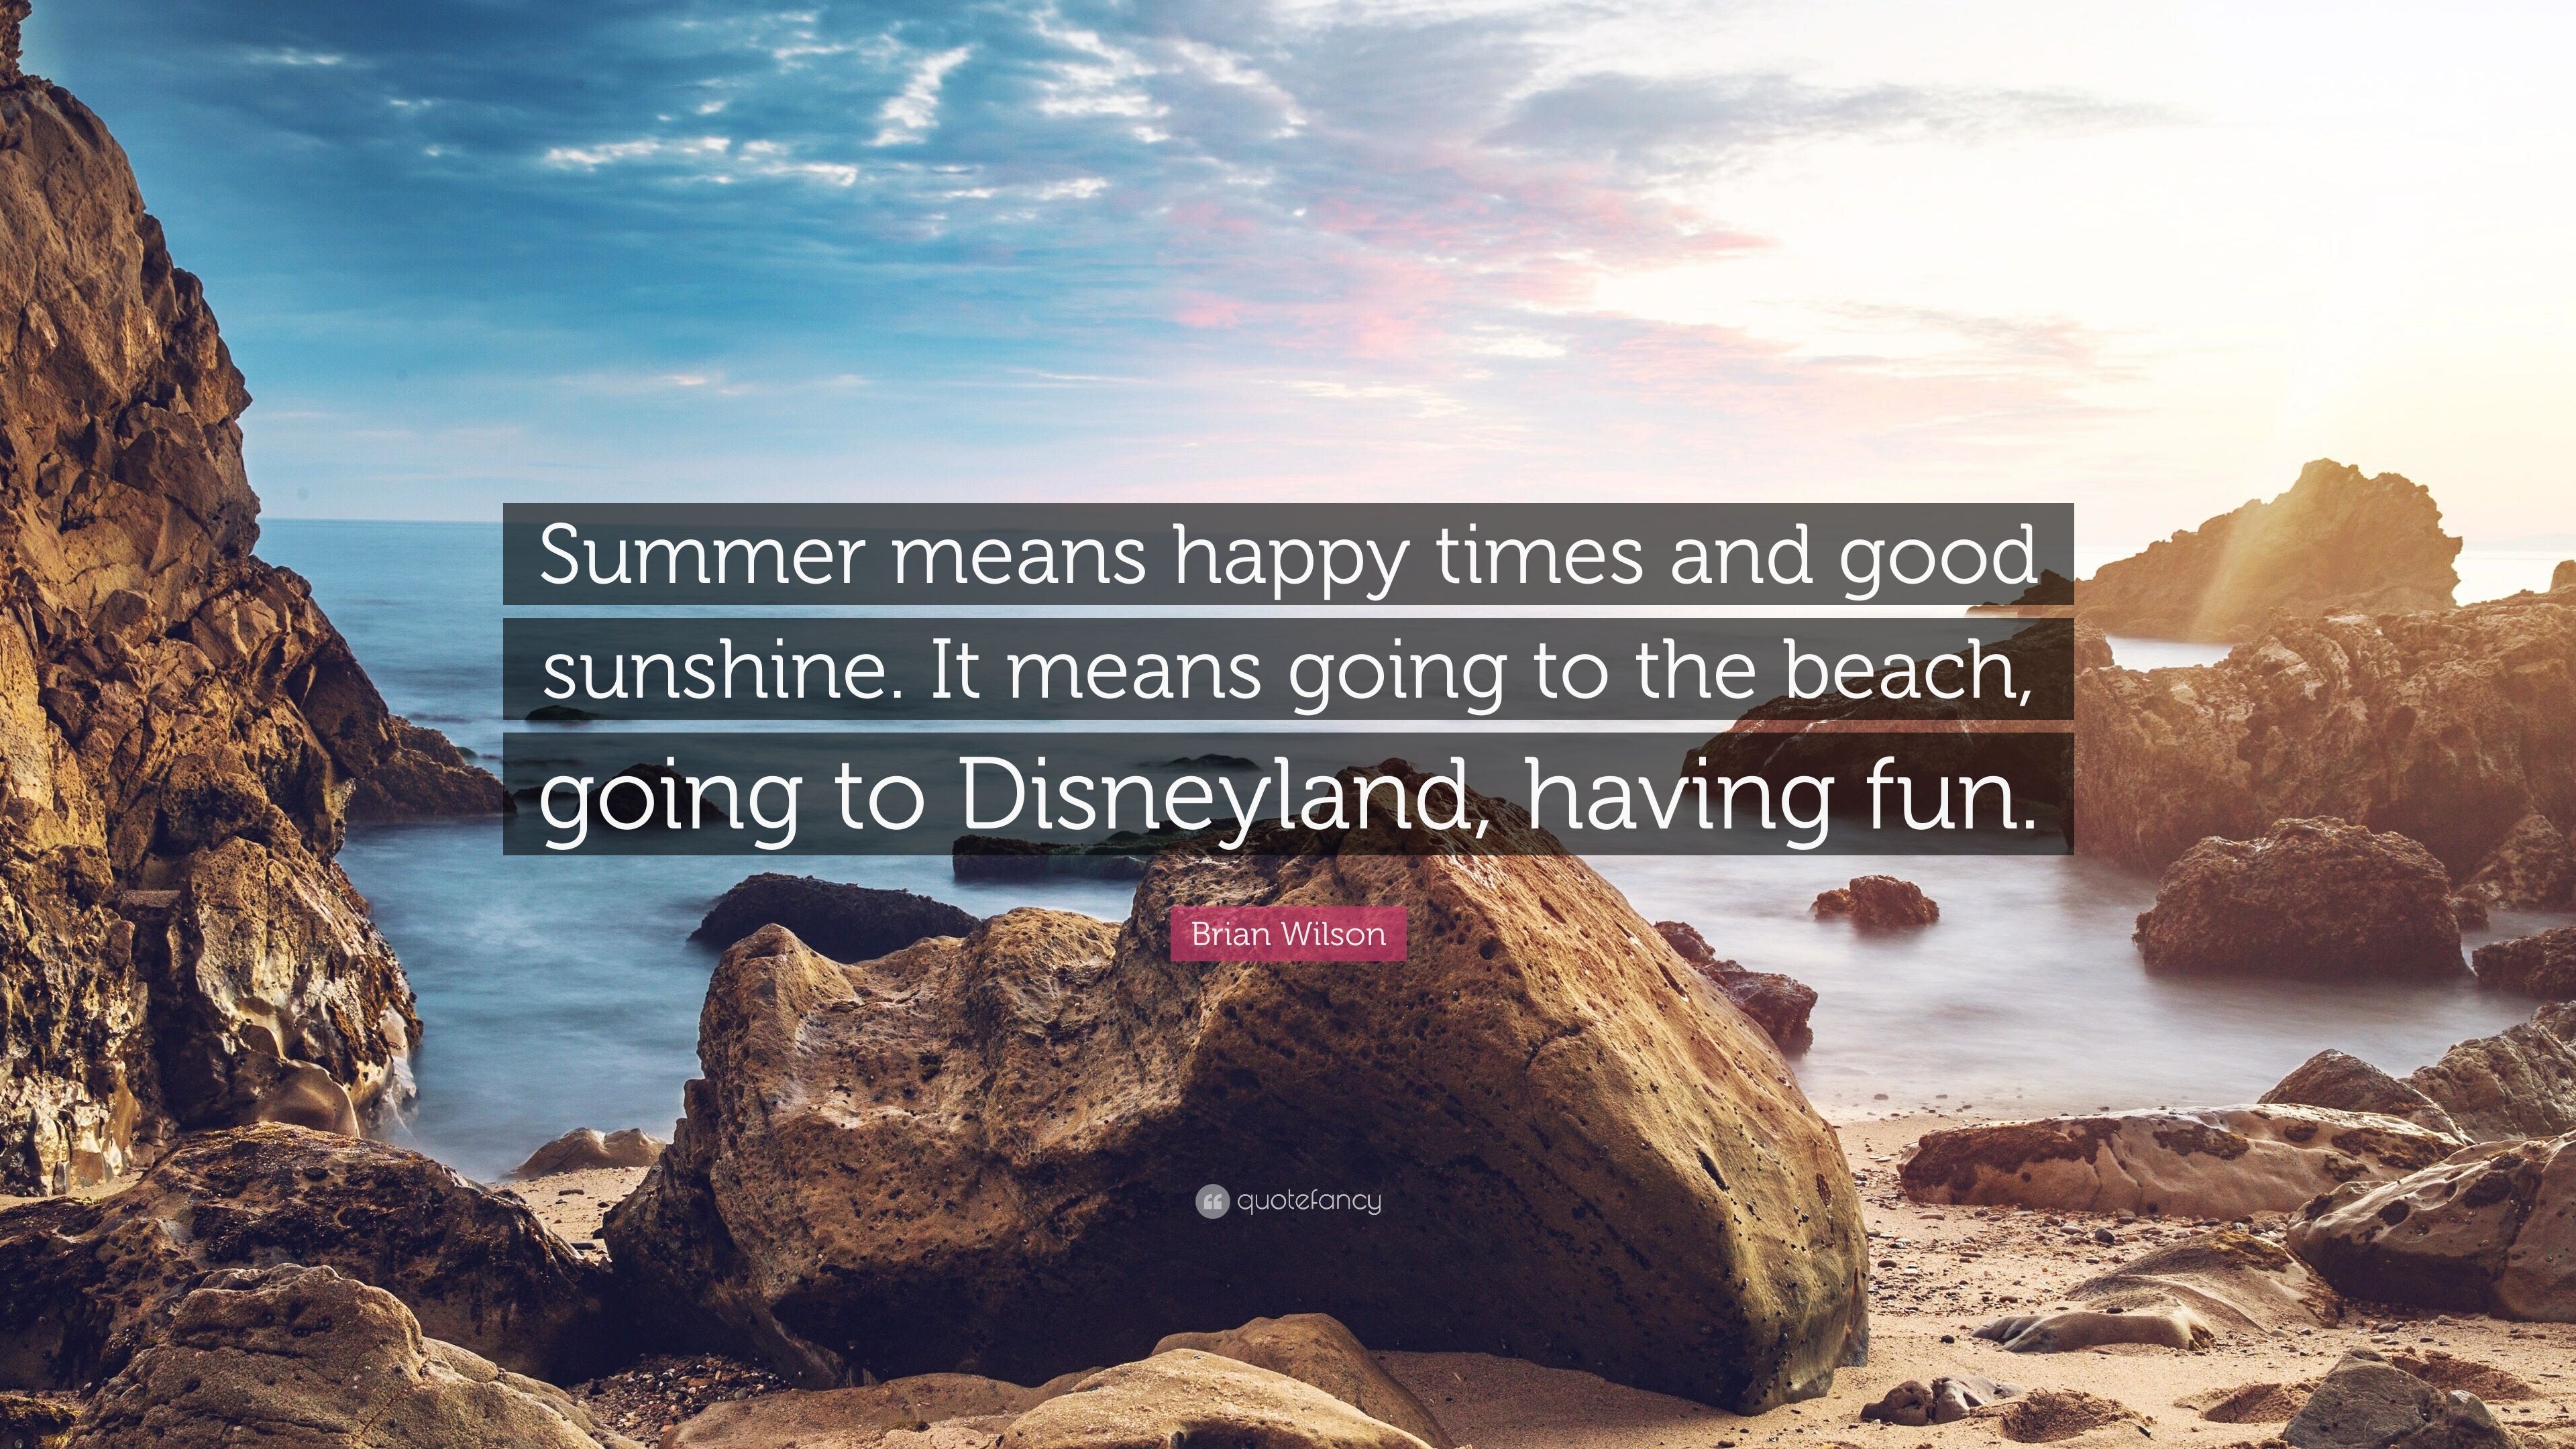 Brian Wilson Quote: “Summer means happy times and good sunshine. It means going to the beach